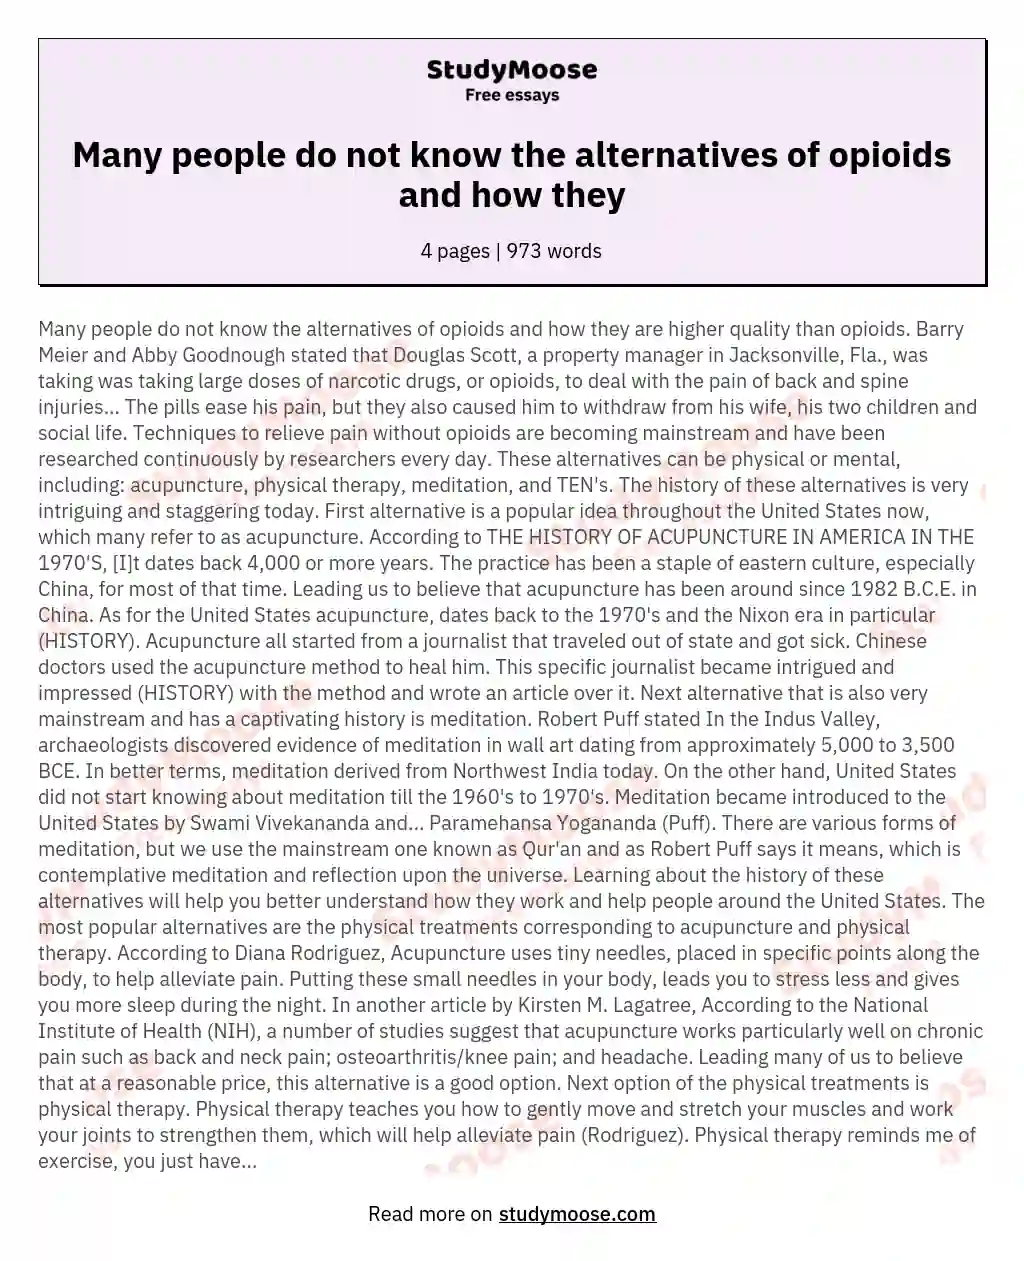 Many people do not know the alternatives of opioids and how they essay